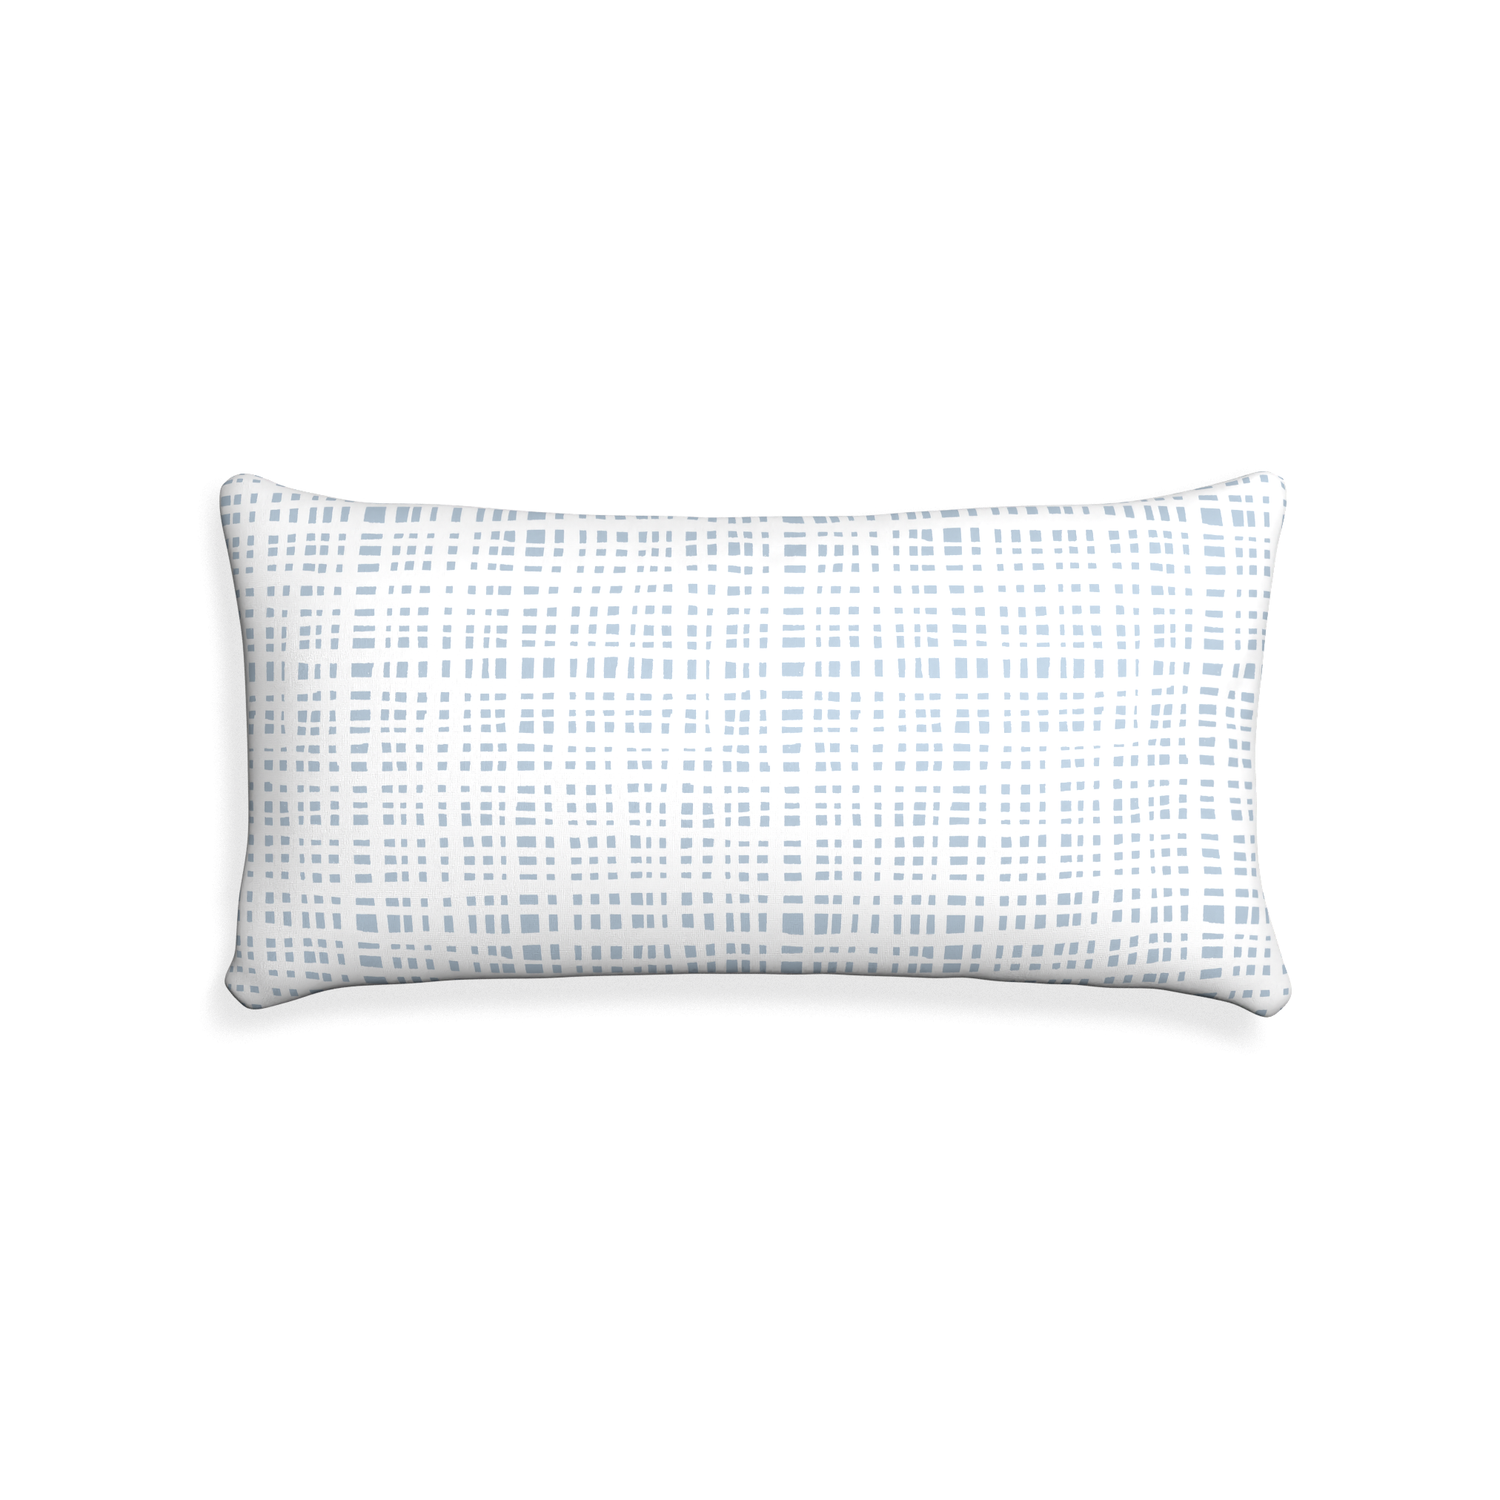 Midi-lumbar ginger custom plaid sky bluepillow with none on white background